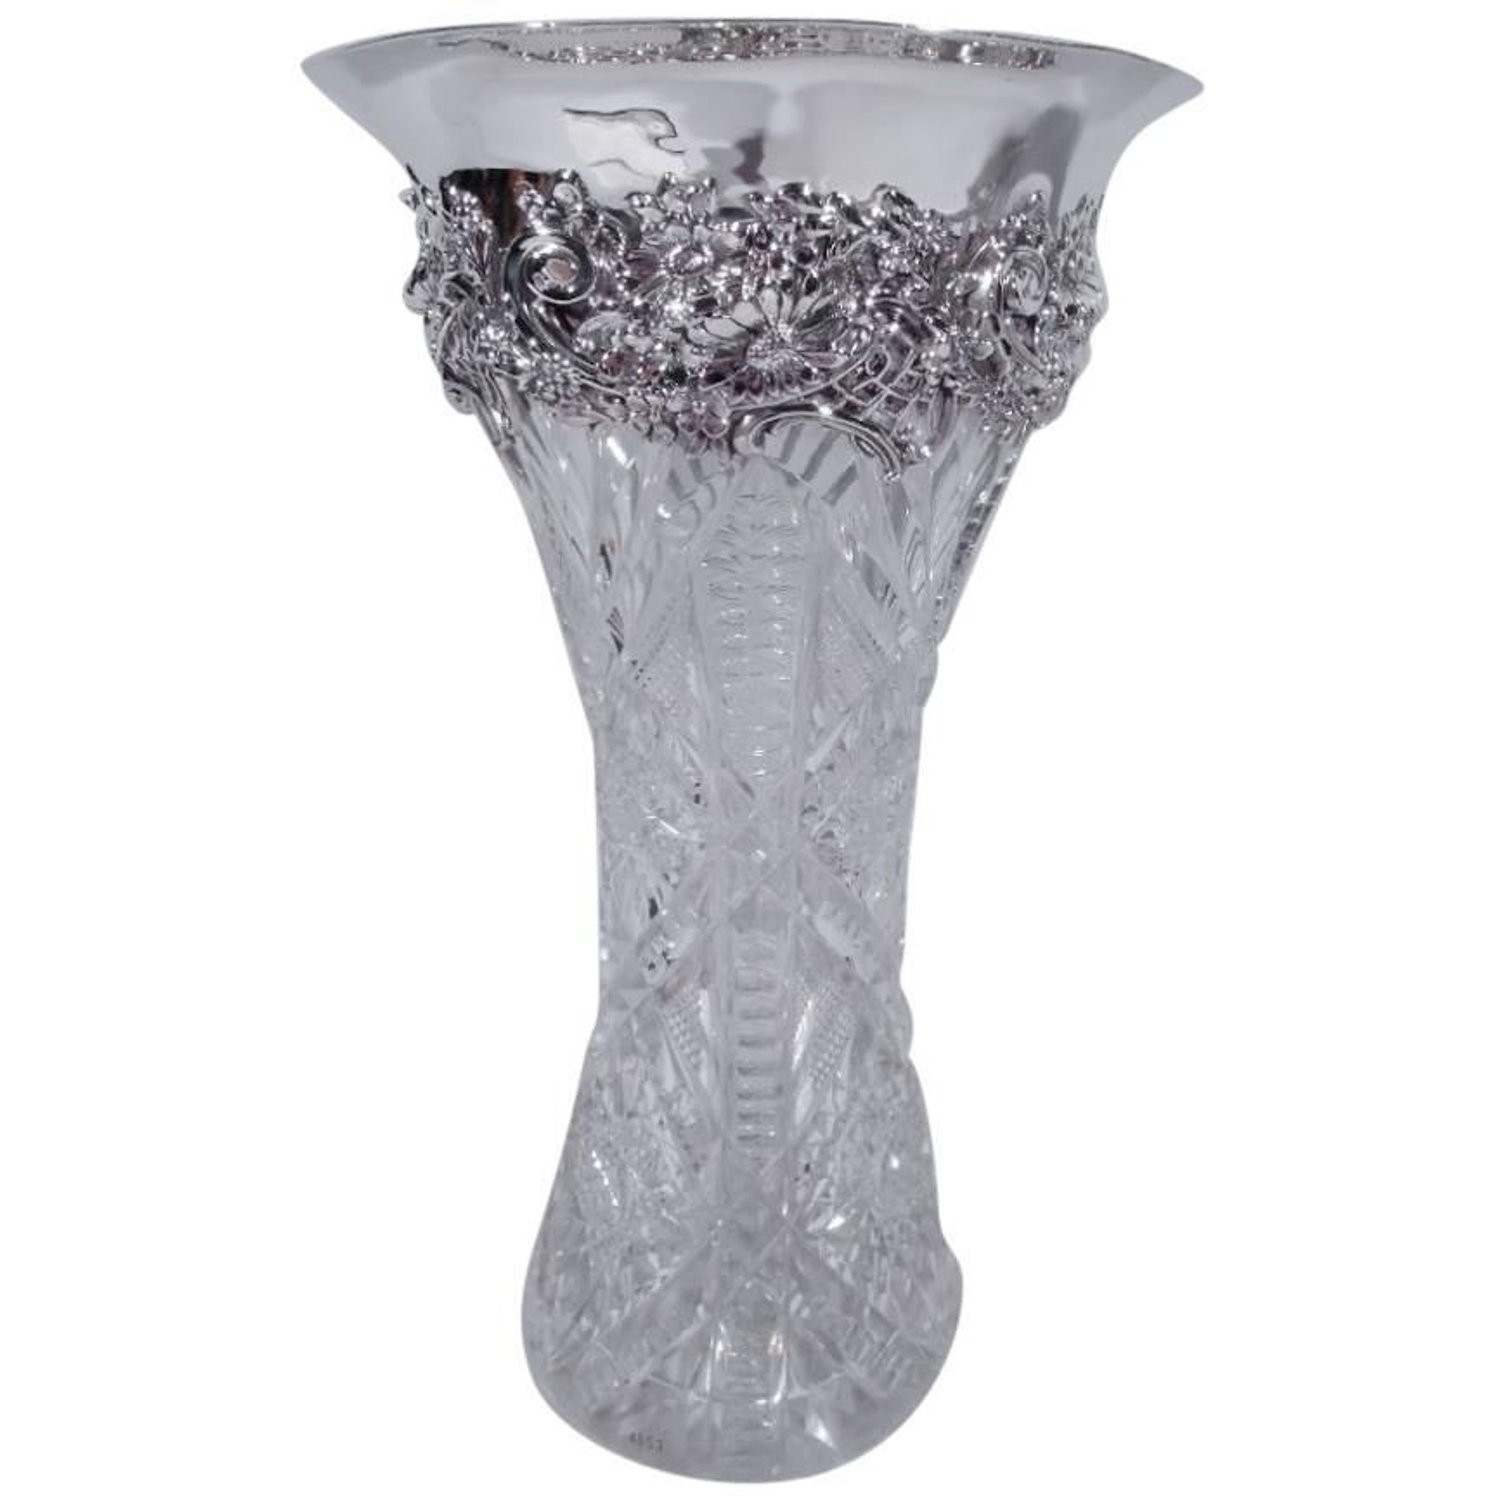 14 Cute Vintage Cut Glass Vase 2024 free download vintage cut glass vase of antique brilliant cut glass and sterling silver vase by redlich for pertaining to antique brilliant cut glass and sterling silver vase by redlich for sale at 1stdib